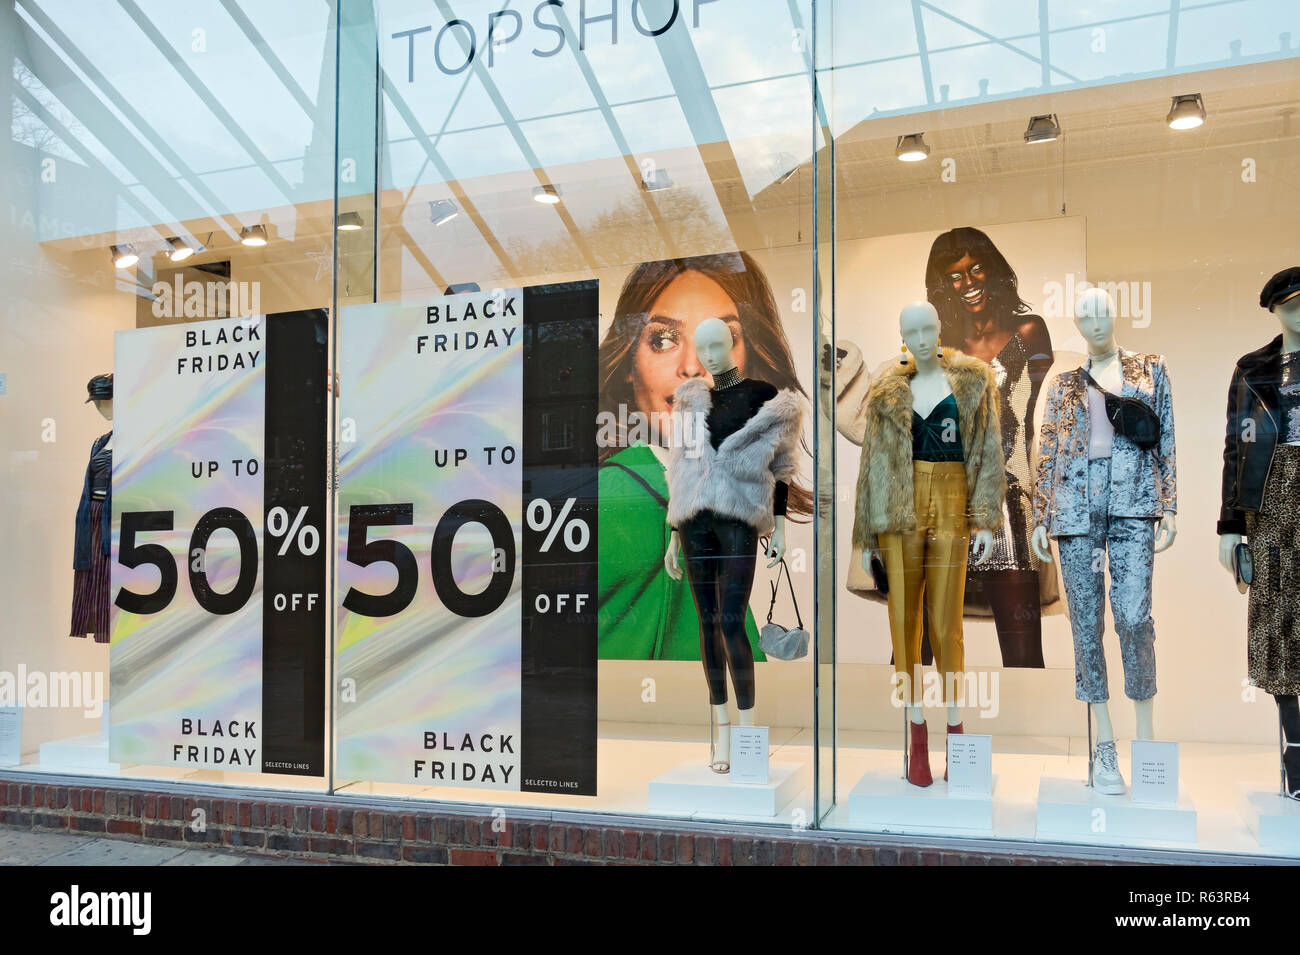 Black Friday signs sign on Topshop fashion clothes clothing retail retailer  shop store window England UK United Kingdom GB Great Britain Stock Photo -  Alamy